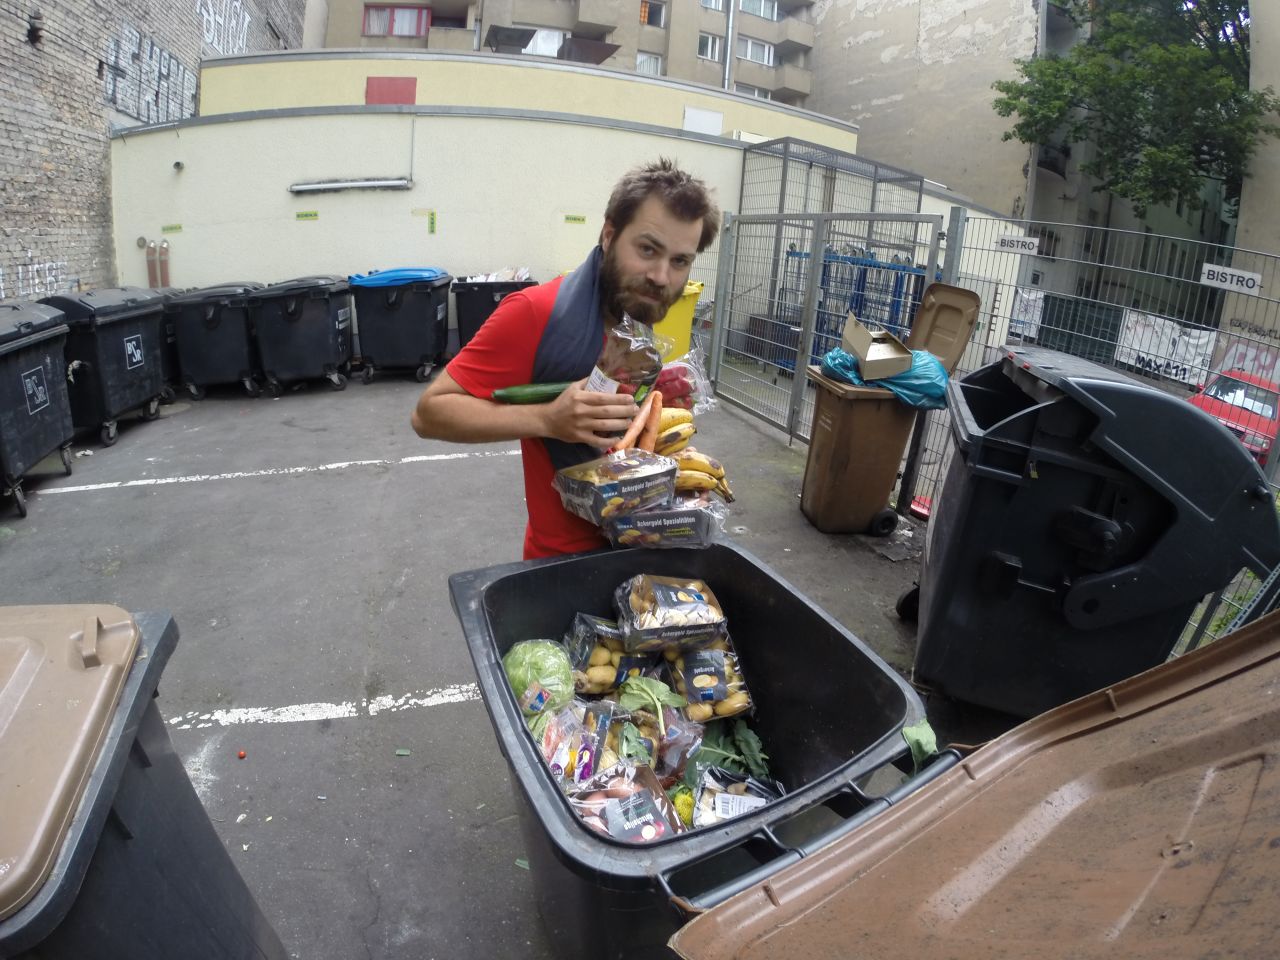 To highlight the issue of food waste, Frenchman Baptiste Dubanchet cycled from Paris to Warsaw eating food only found in trash cans. 